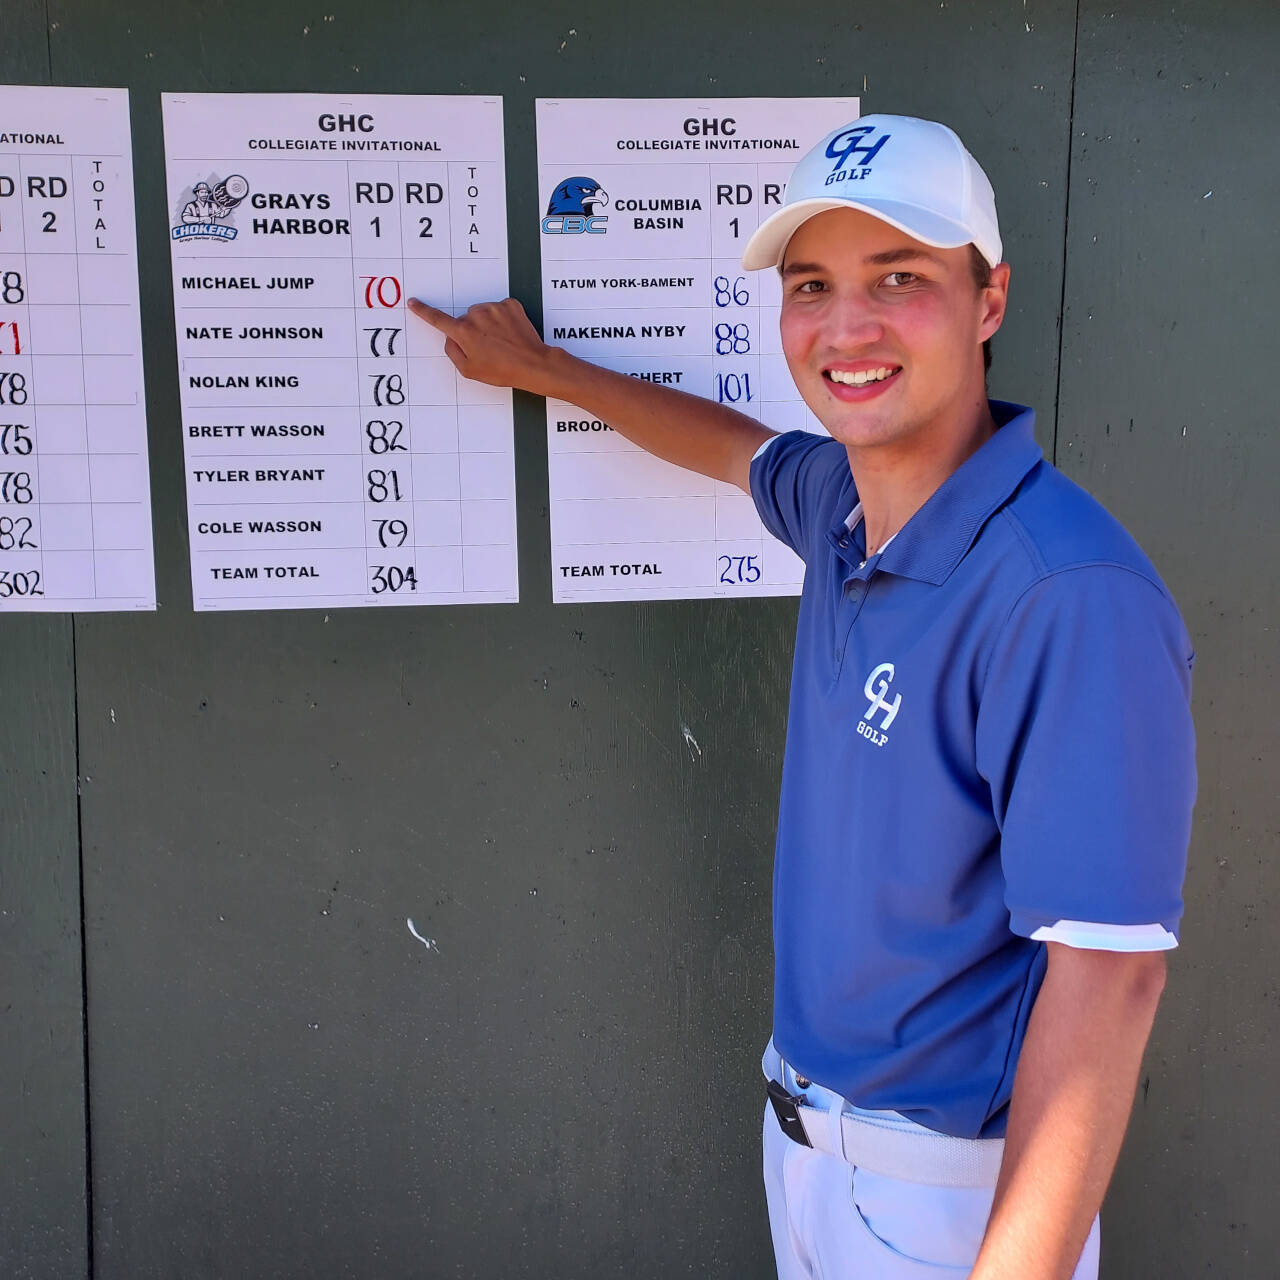 SUBMITTED PHOTO Grays Harbor College golfer and team captain Michael Jump was accepted into the PGA Management Program at the University of Nevada-Las Vegas, GHC announced on Thursday. Jump, of Hoquiam, will attend UNLV in the fall.